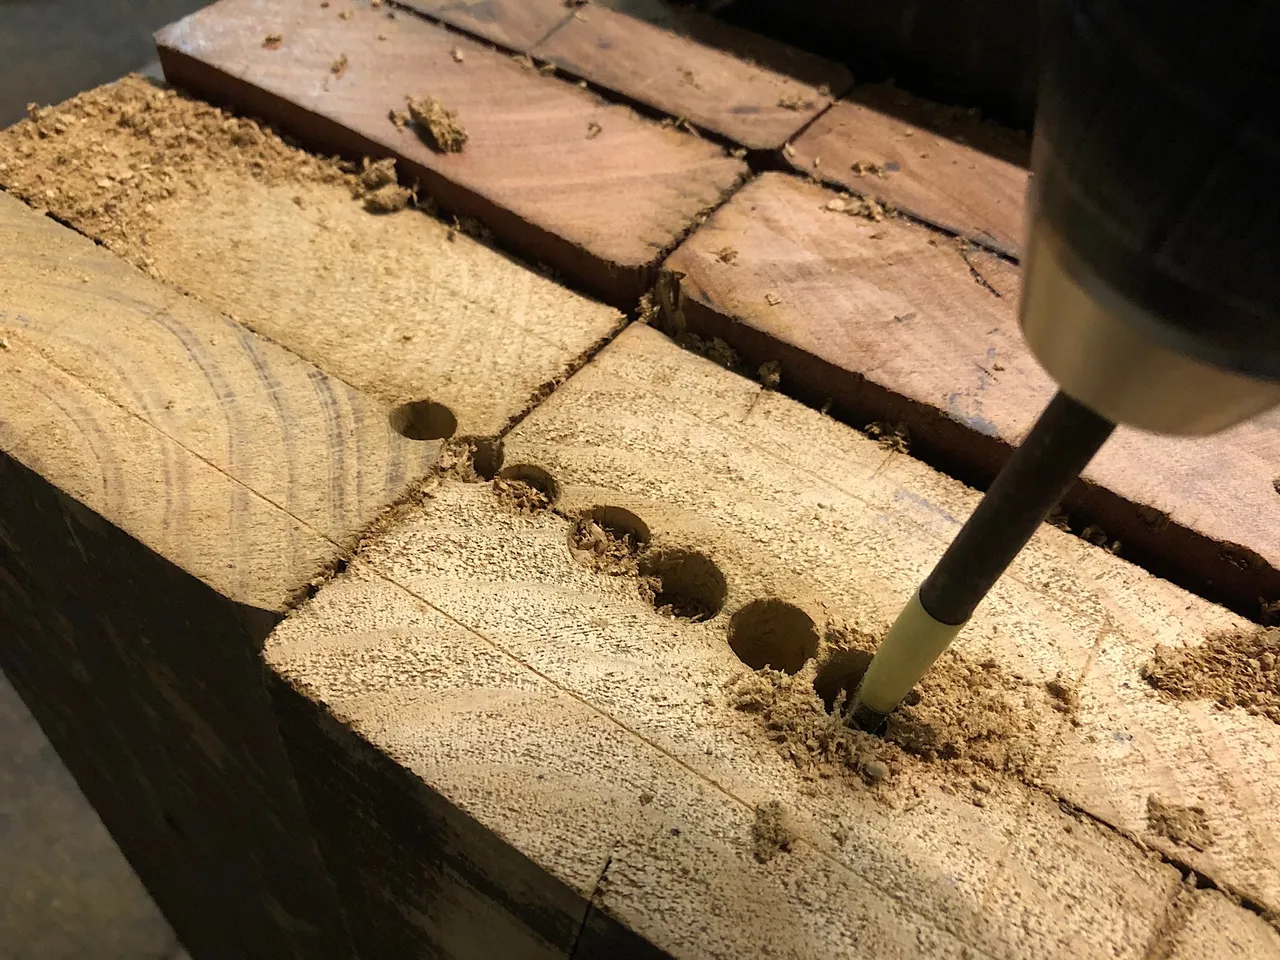 Drilling hole for in a wooden anvil stand